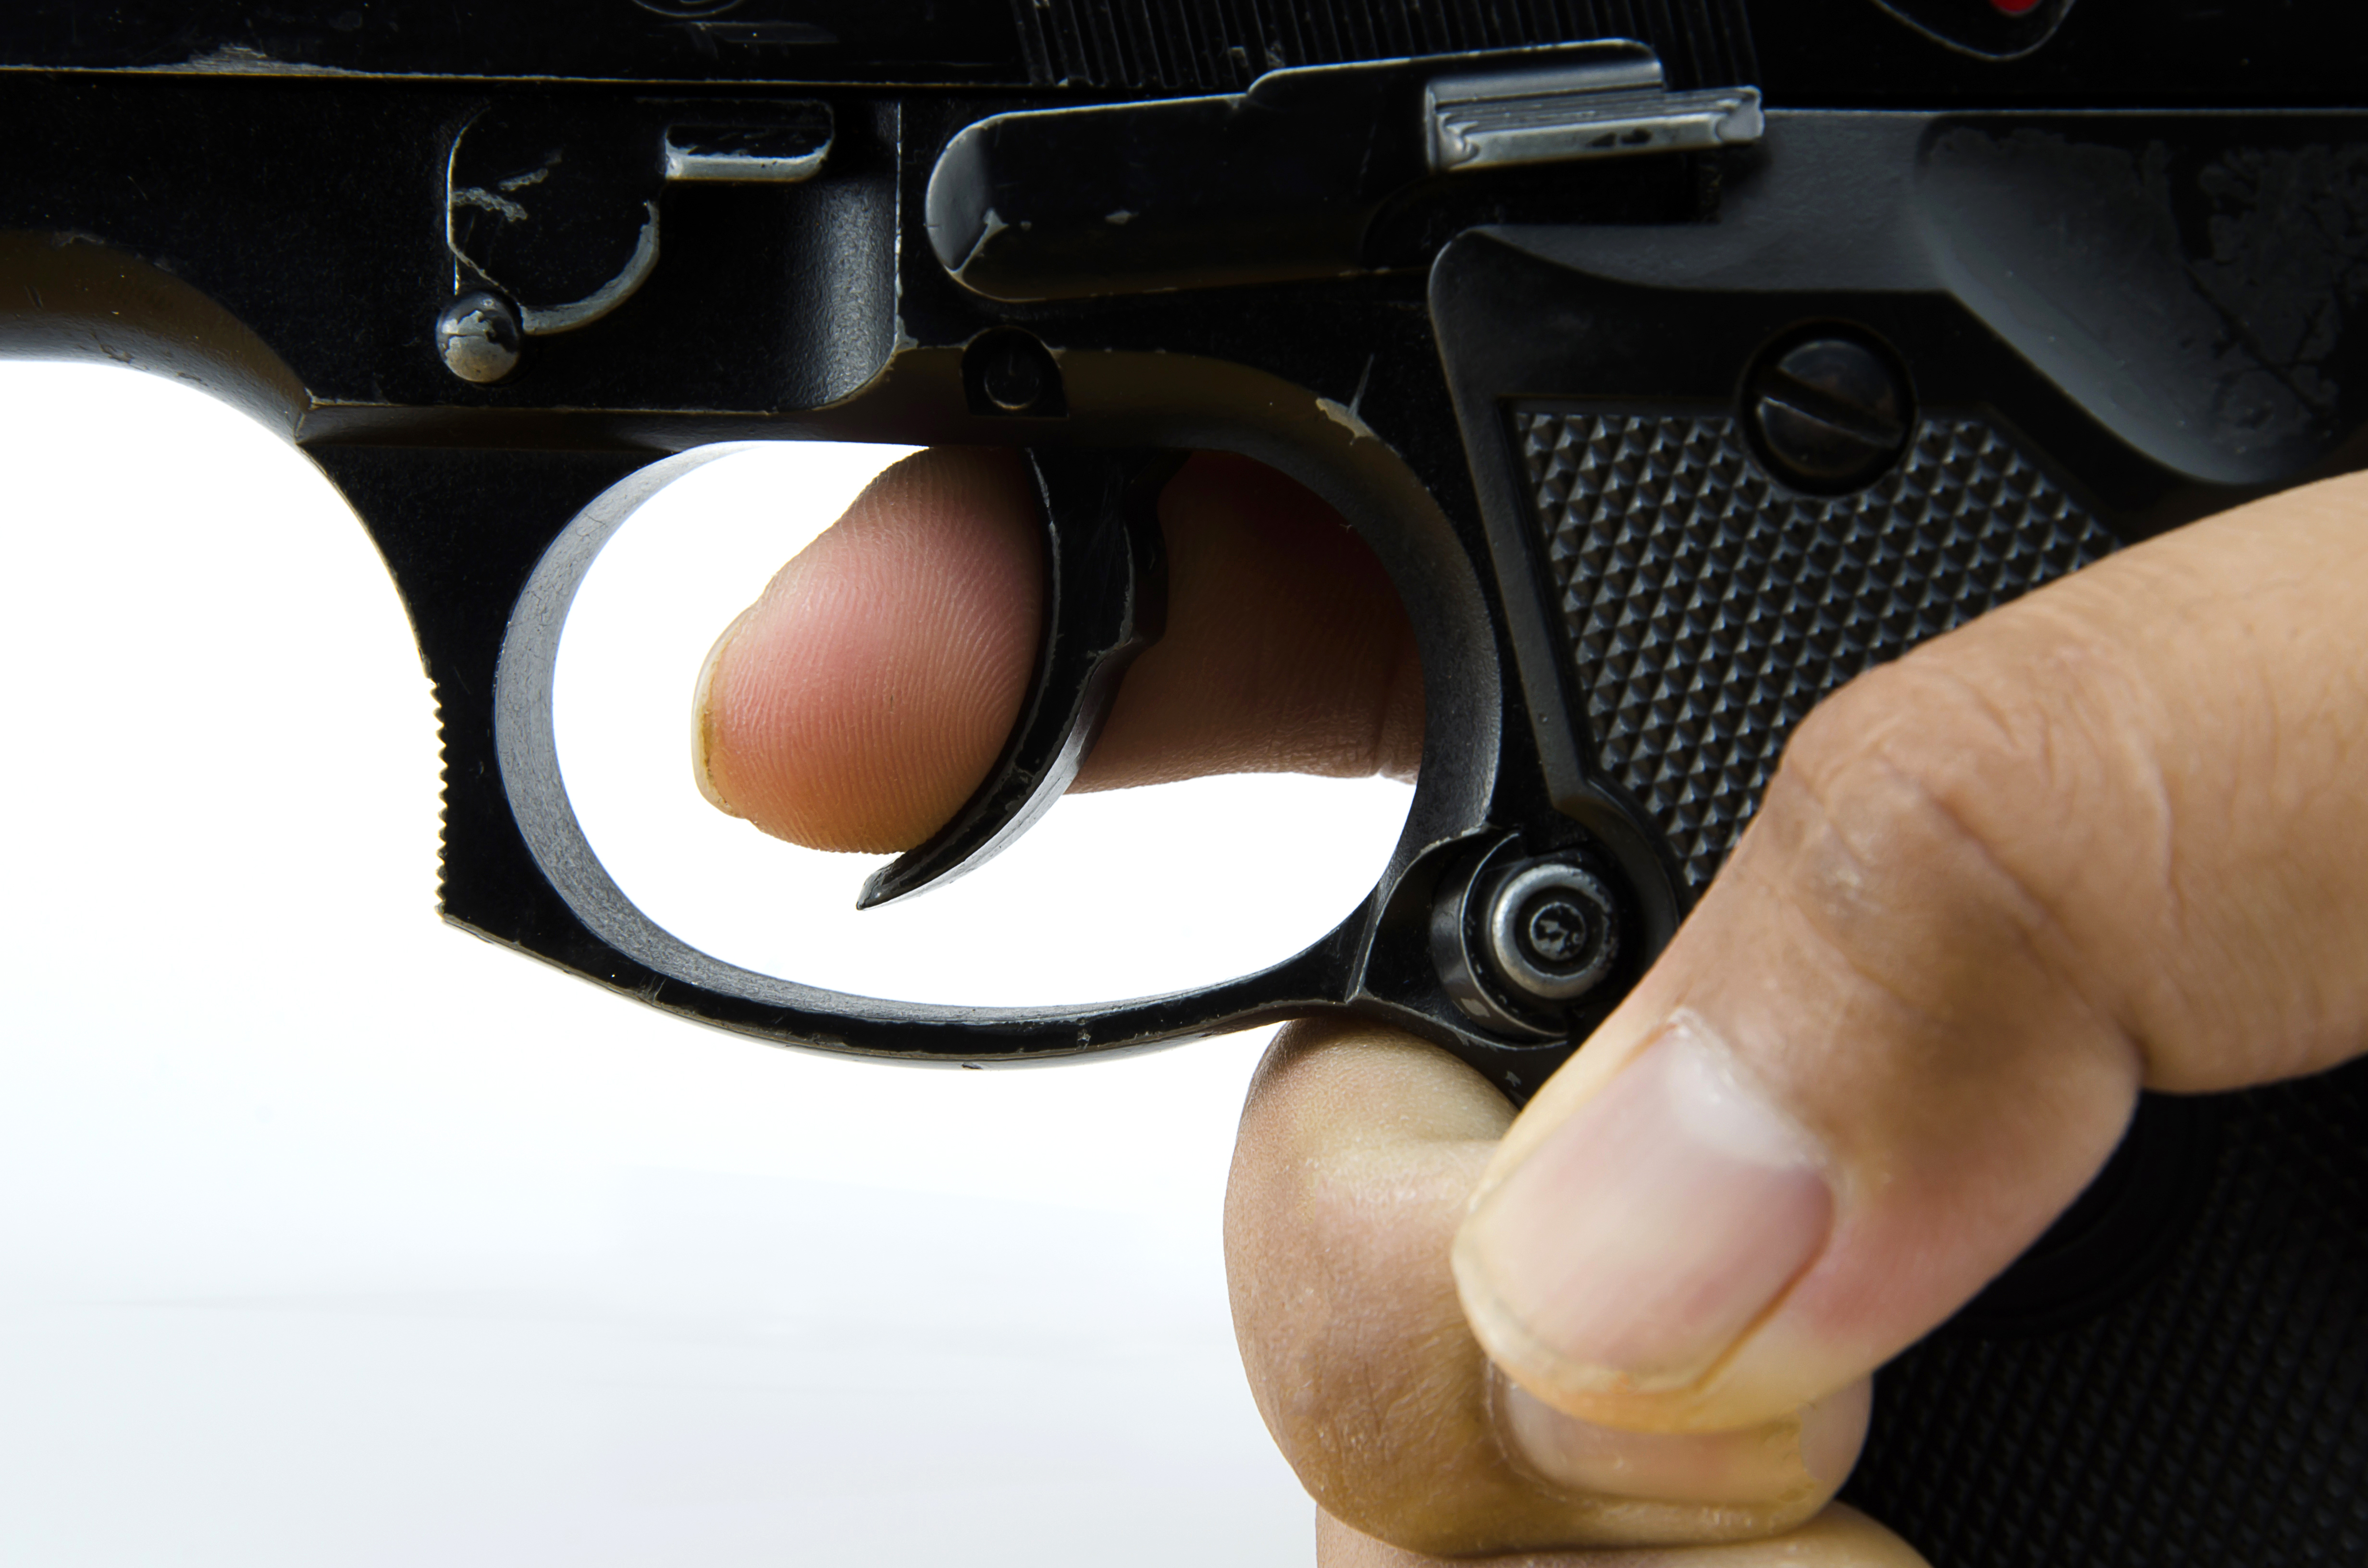 Closes up the finger on the trigger of the gun. | Source: Shutterstock